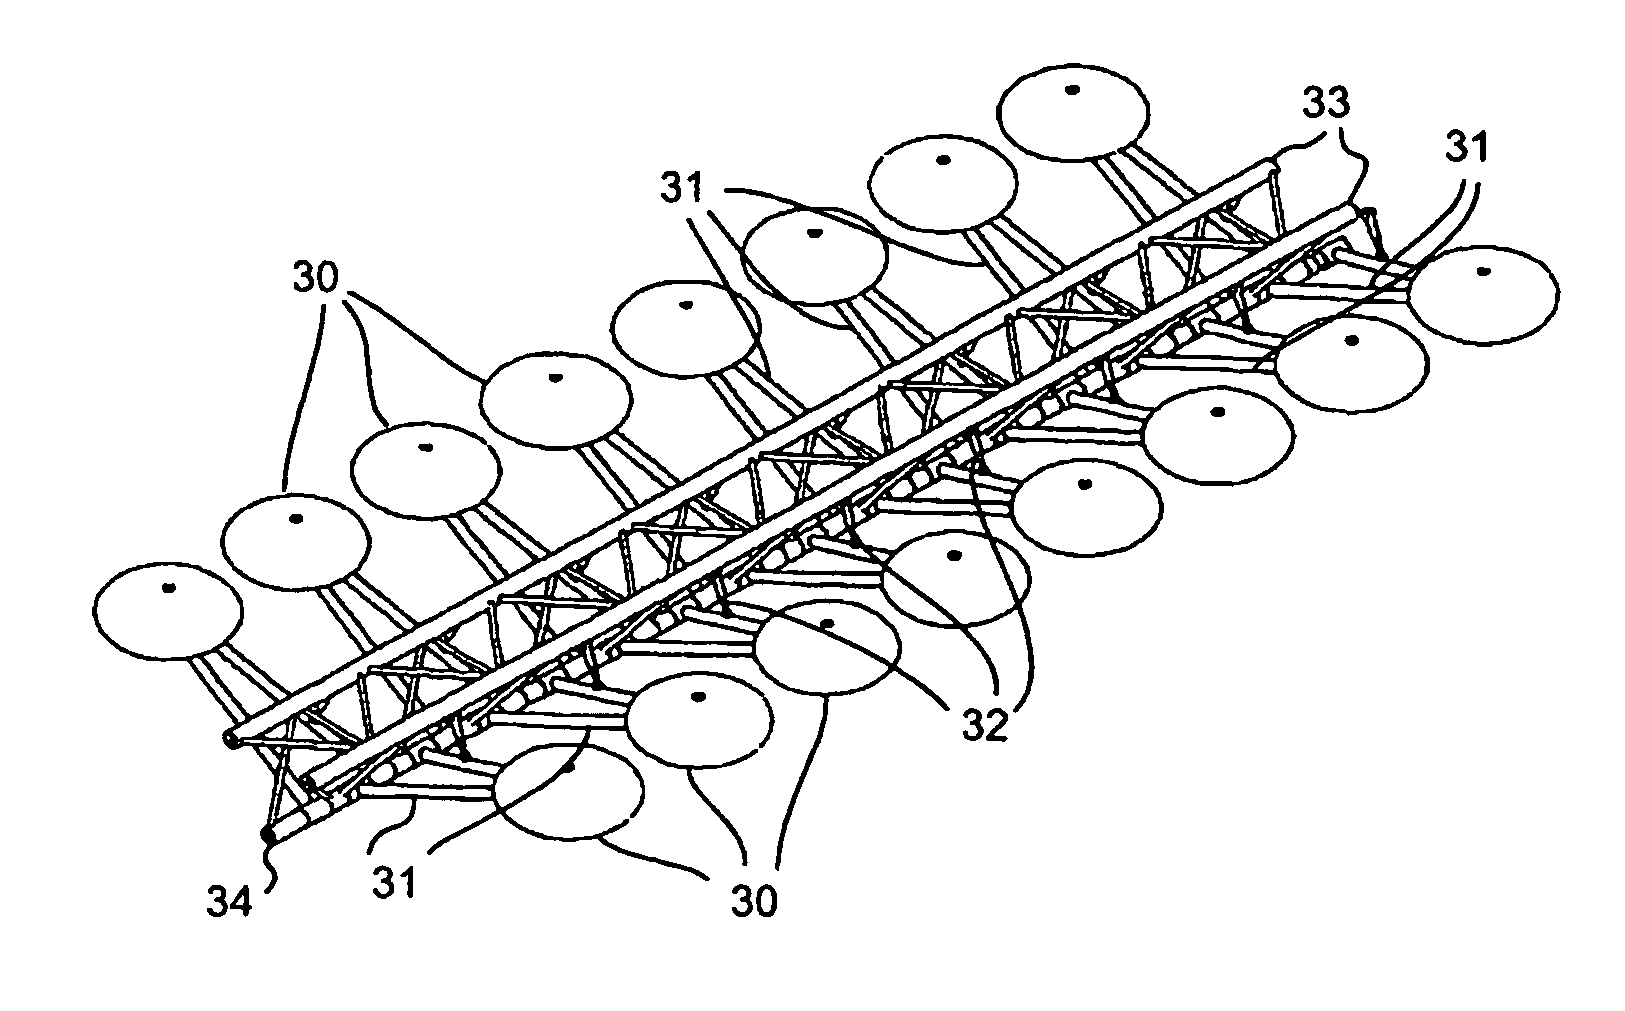 Method and apparatus for converting ocean wave energy into electricity